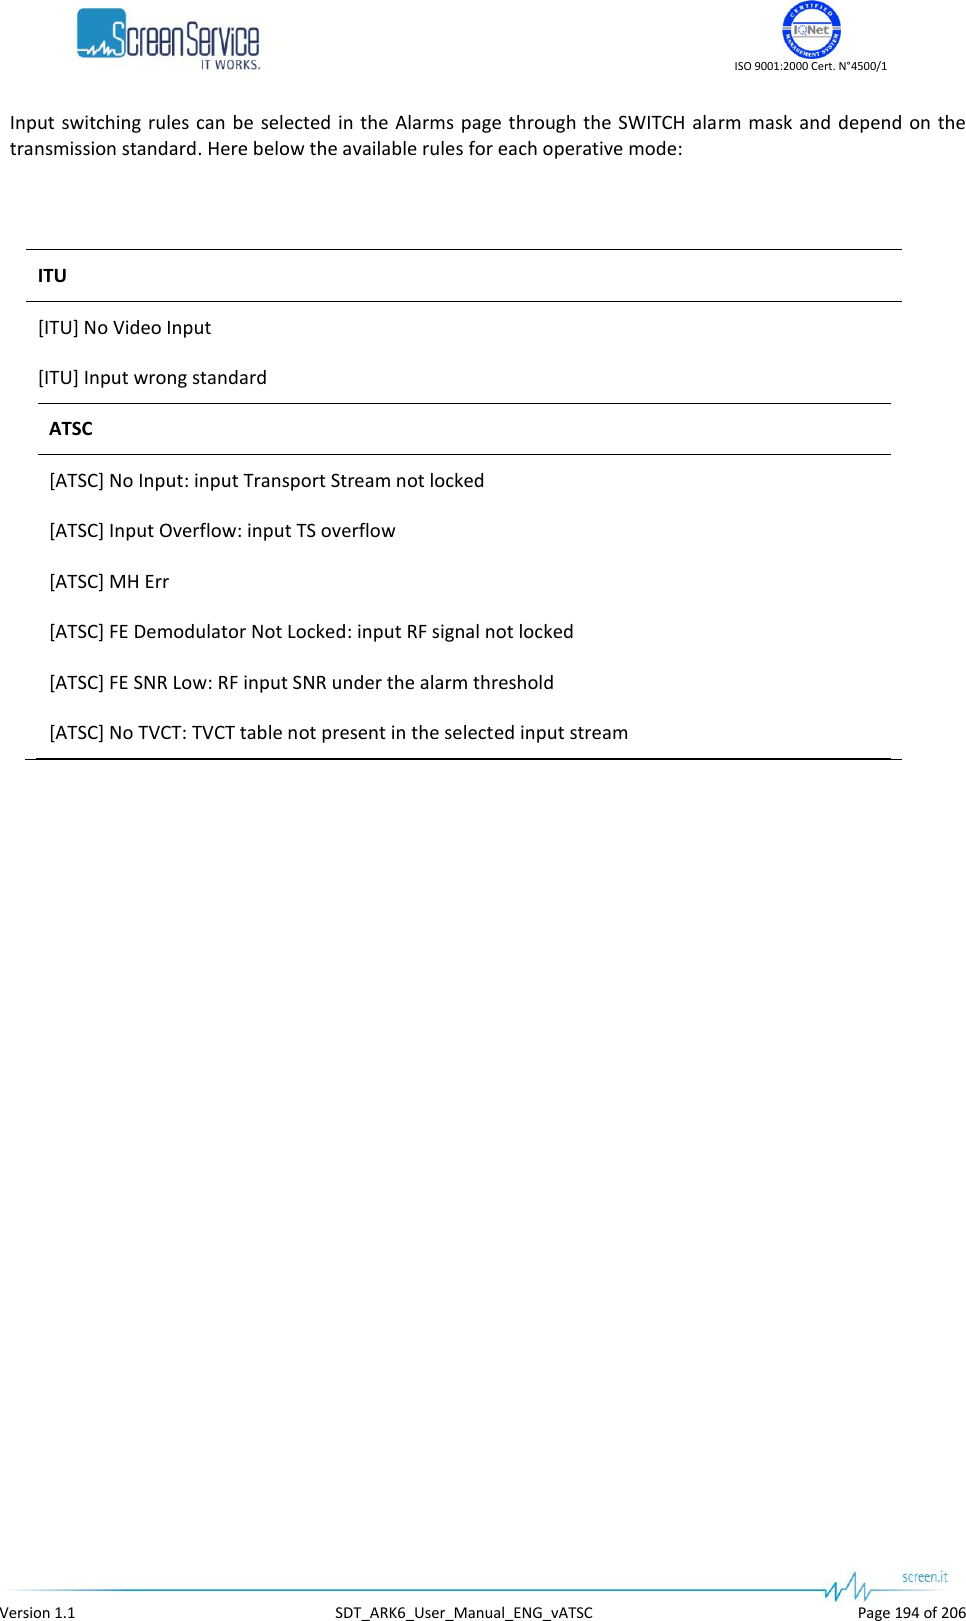    ISO 9001:2000 Cert. N°4500/1   Version 1.1  SDT_ARK6_User_Manual_ENG_vATSC  Page 194 of 206 Input  switching rules can be selected in the Alarms page through the SWITCH  alarm mask and  depend on the transmission standard. Here below the available rules for each operative mode:   ITU [ITU] No Video Input [ITU] Input wrong standard ATSC [ATSC] No Input: input Transport Stream not locked [ATSC] Input Overflow: input TS overflow [ATSC] MH Err [ATSC] FE Demodulator Not Locked: input RF signal not locked [ATSC] FE SNR Low: RF input SNR under the alarm threshold [ATSC] No TVCT: TVCT table not present in the selected input stream   